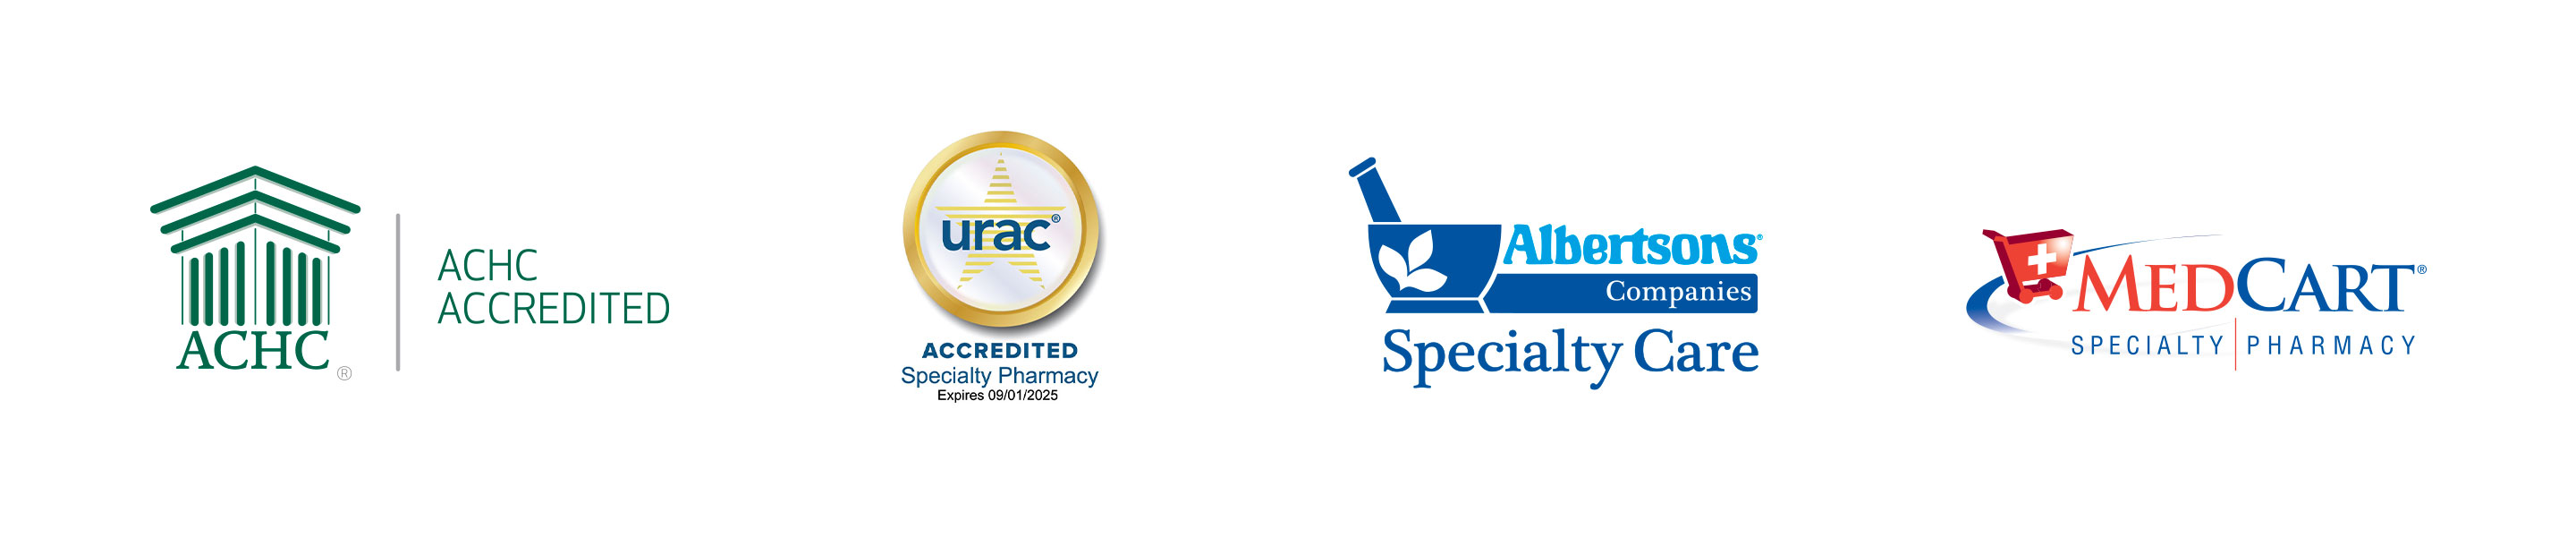 ACHC Accredited, URAC, Albertsons companies specialist care, Medcart specialist Pharmacy logos